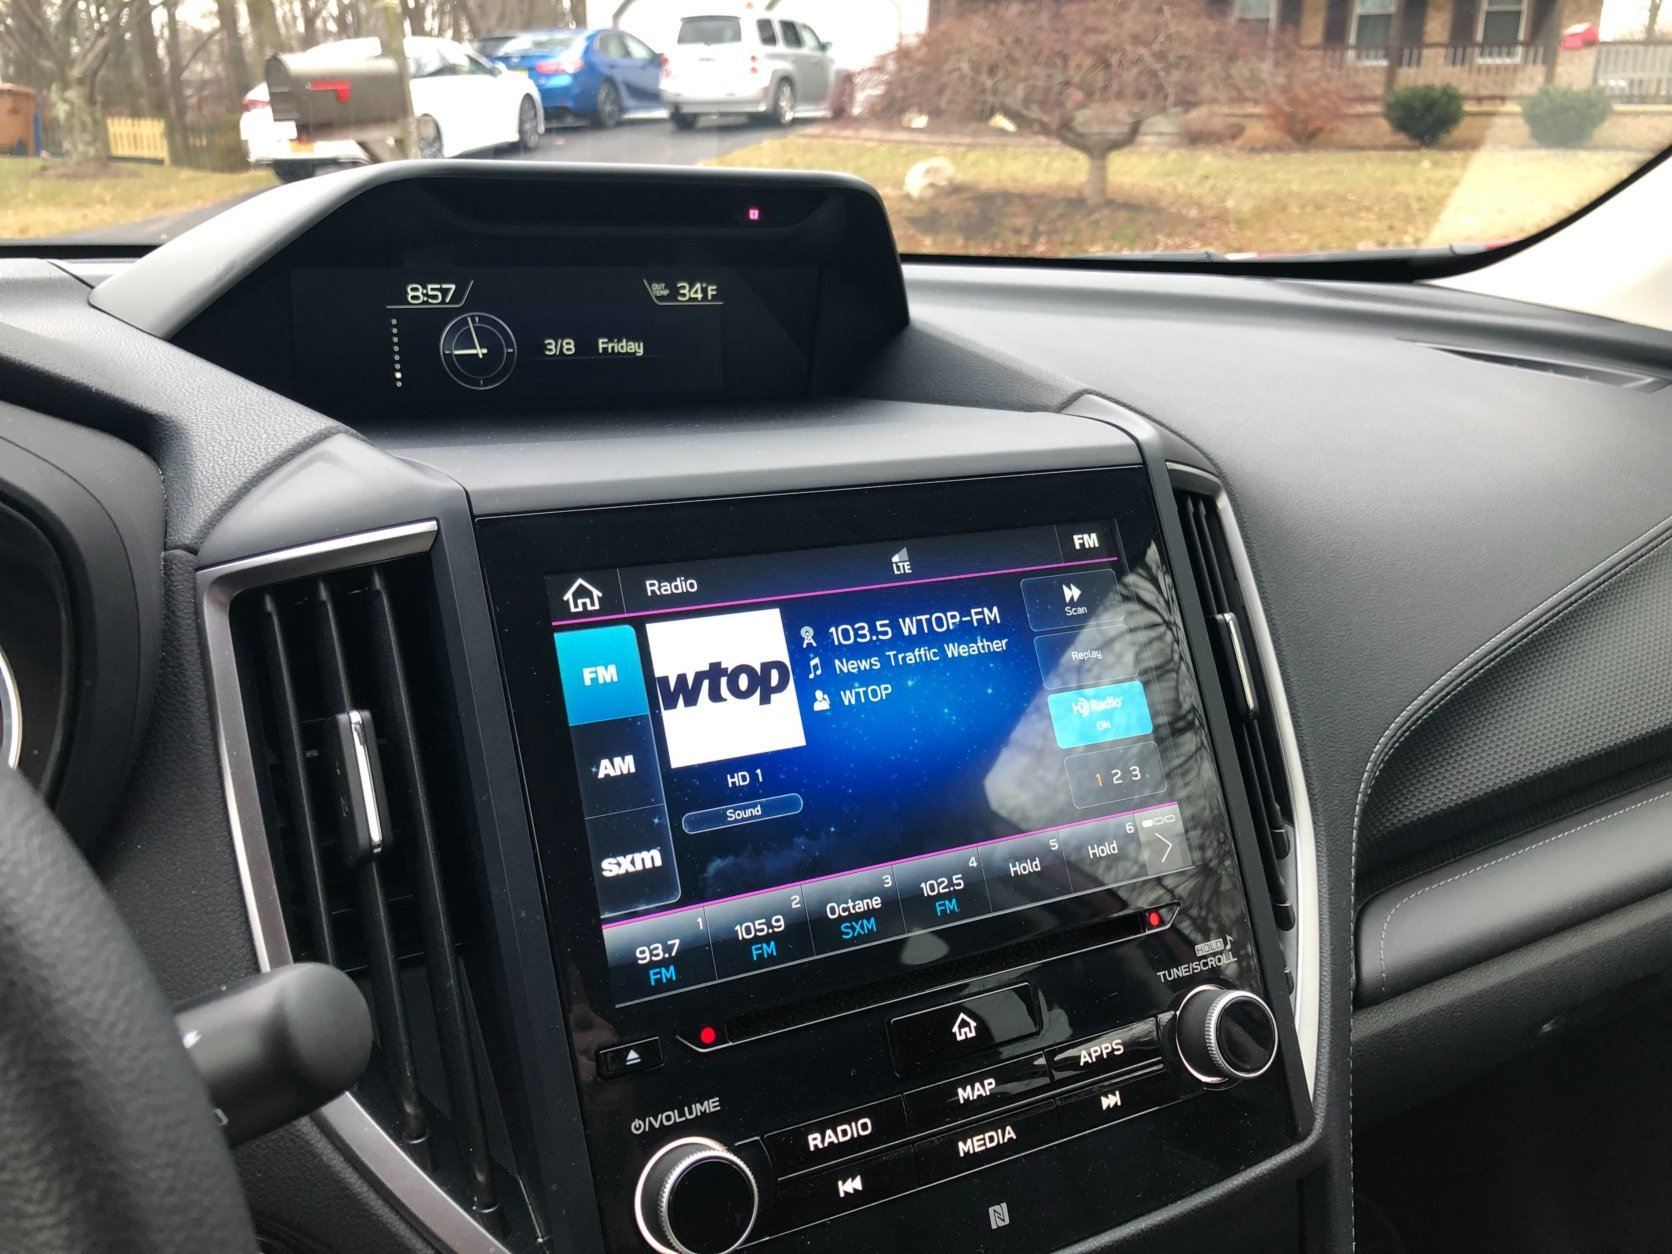 <p>The 8-inch touchscreen with NAV is better than before with improved voice commands. There’s no repeating the address over and over like before.</p>
<p>The 576-watt Harmon Kardon premium audio system sounds better at lower levels than it did at higher volumes.</p>
<p>Safety was clearly high on the design list for the 2019 Subaru Forester. It has the Eye Sight system that has Adaptive Cruise, Lane Keep Assist and Forward Collison Mitigation. New for 2019 is &#8220;Driver Focus&#8221; that helps alert drivers that might be drowsy or not attentive by using a near-infrared camera.</p>
<p>The 2019 Subaru Forester Touring is a compact Ute with plenty of space and the capability to go just about anywhere. With an improved ride and interior, the Subaru goes more mainstream while still marching to the beat of its own drum.</p>
